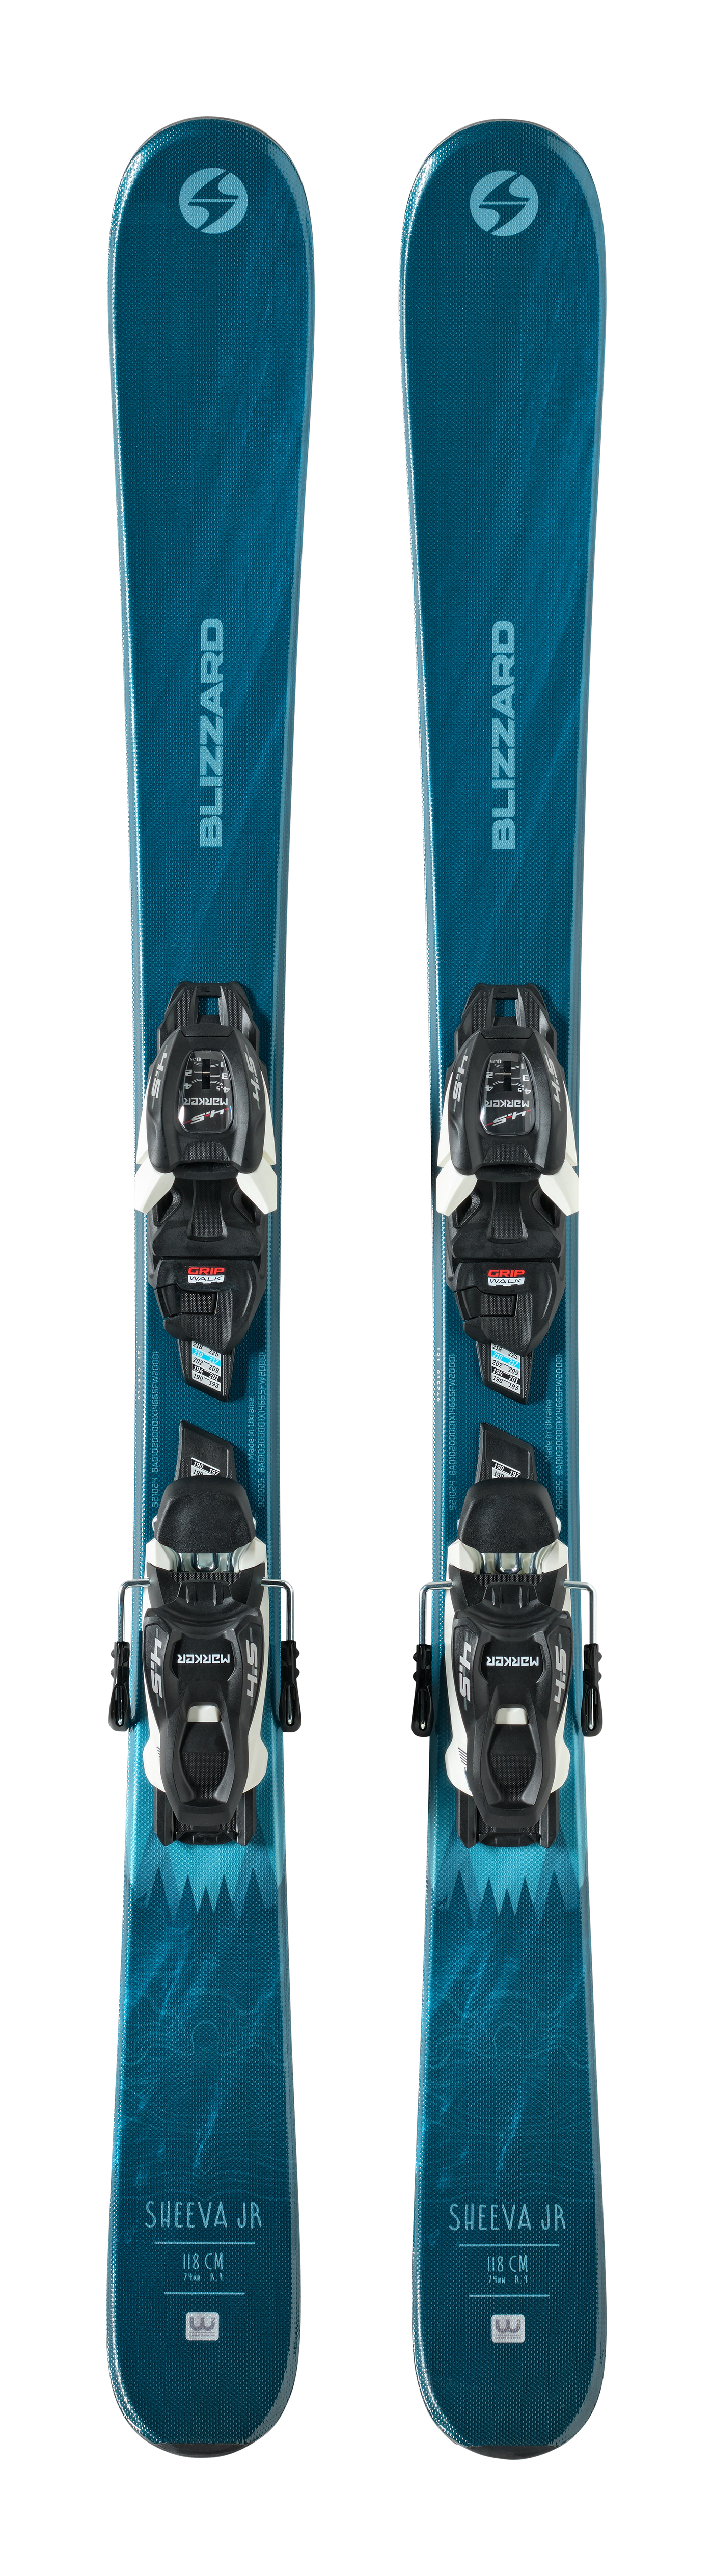 Blizzard Sheeva Twin Junior Snow Skis with Marker FDT bindings